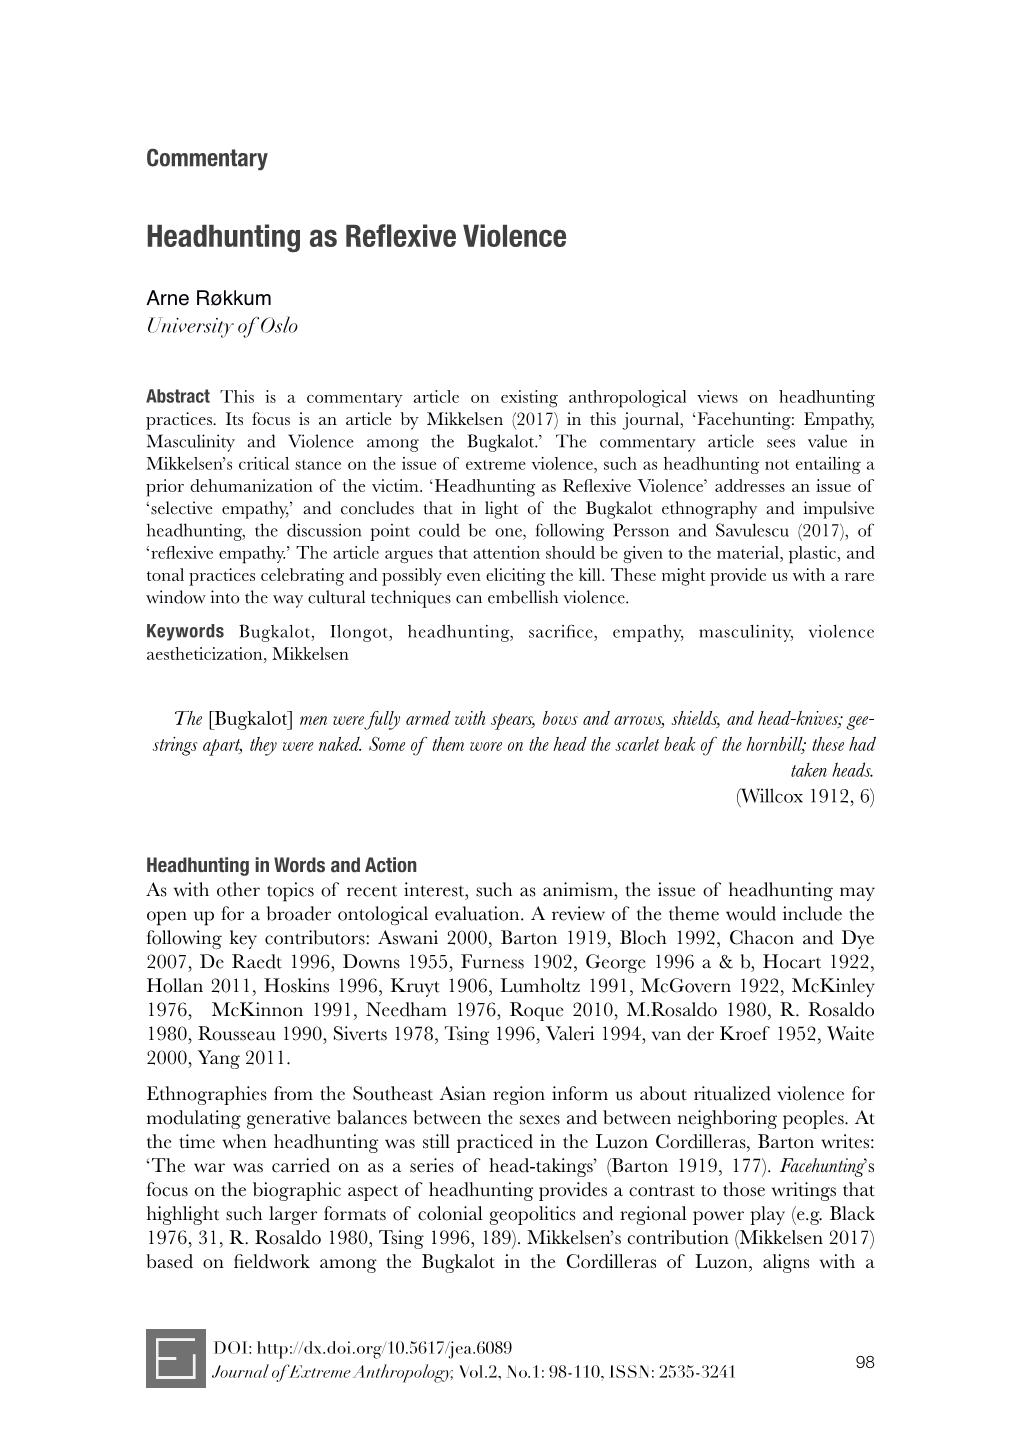 Headhunting As Reflexive Violence